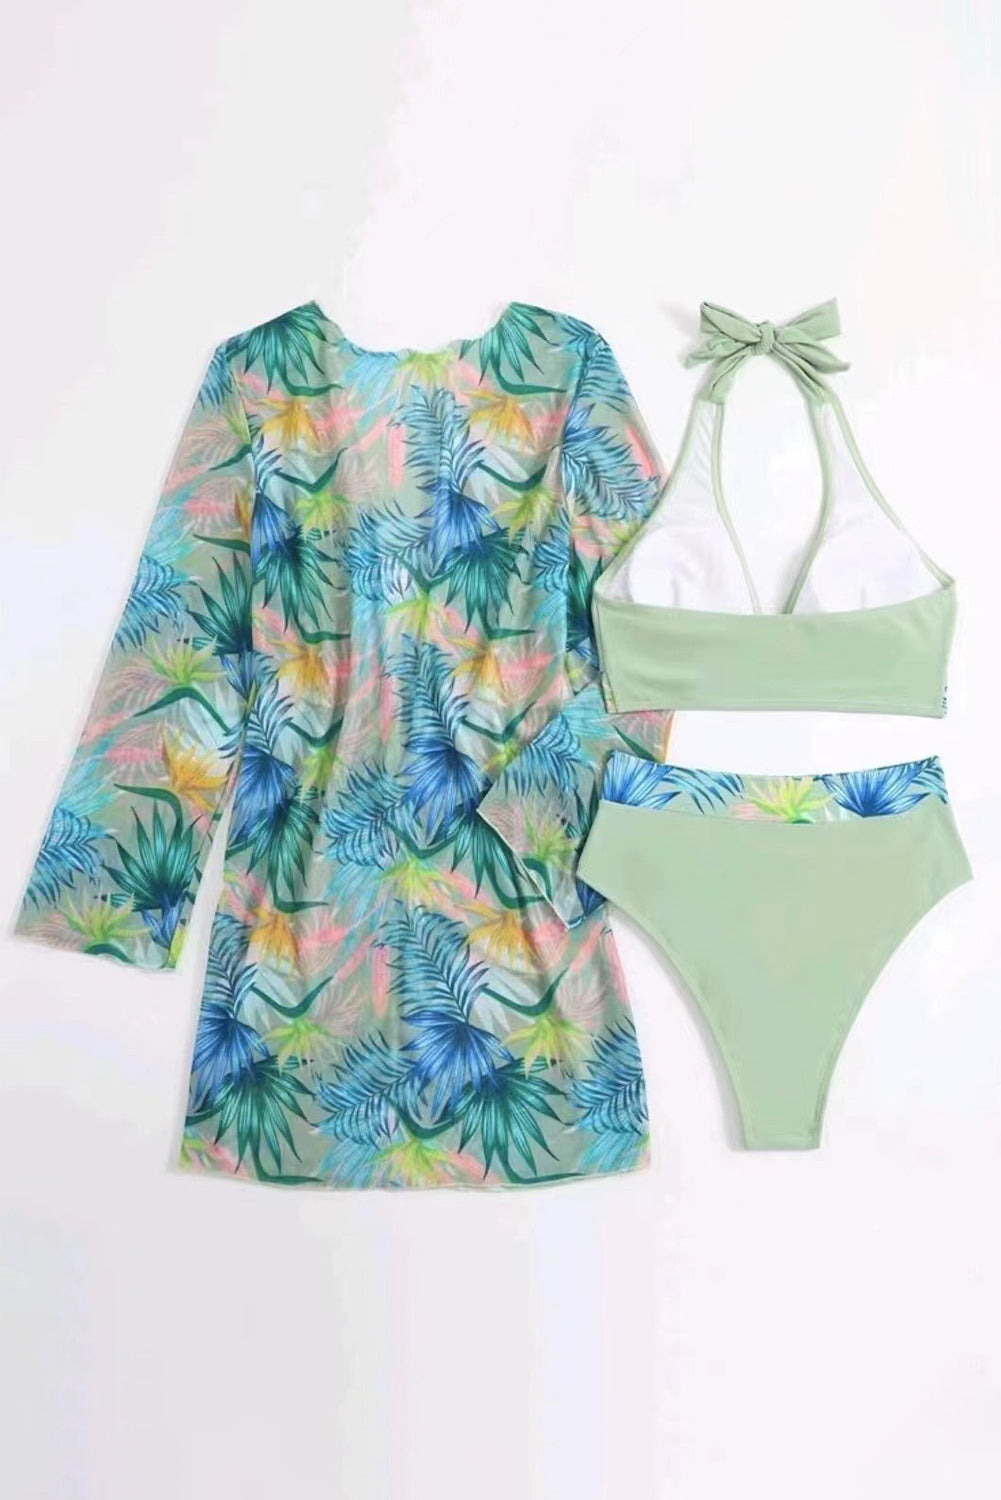 Multiple Colored Tropical Print 3Pc. Halter Bikini Set with Cover up